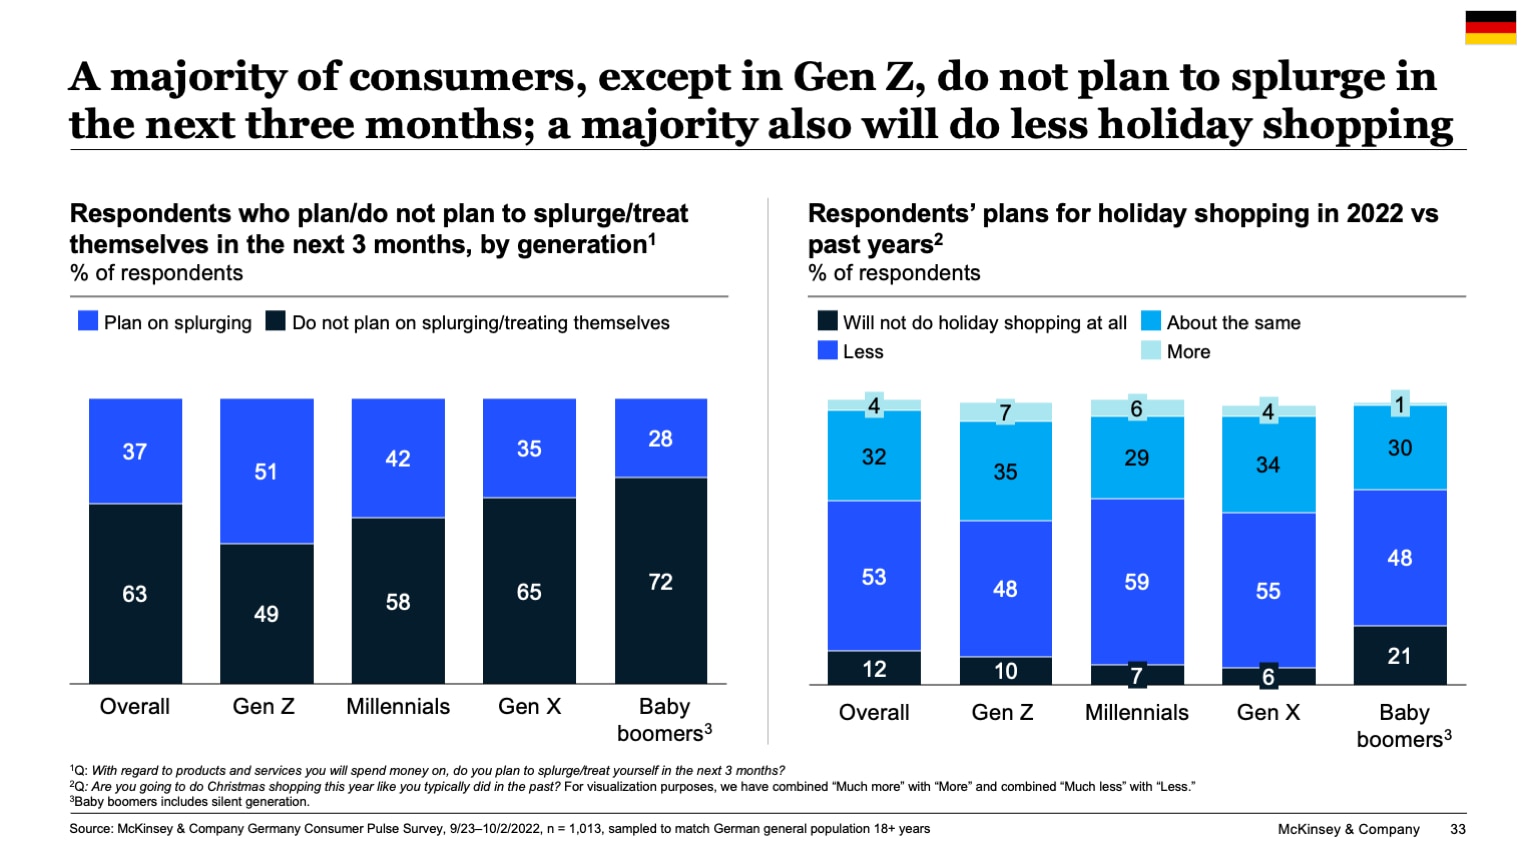 A majority of consumers, except in Gen Z, do not plan to splurge in the next three months; a majority also will do less holiday shopping